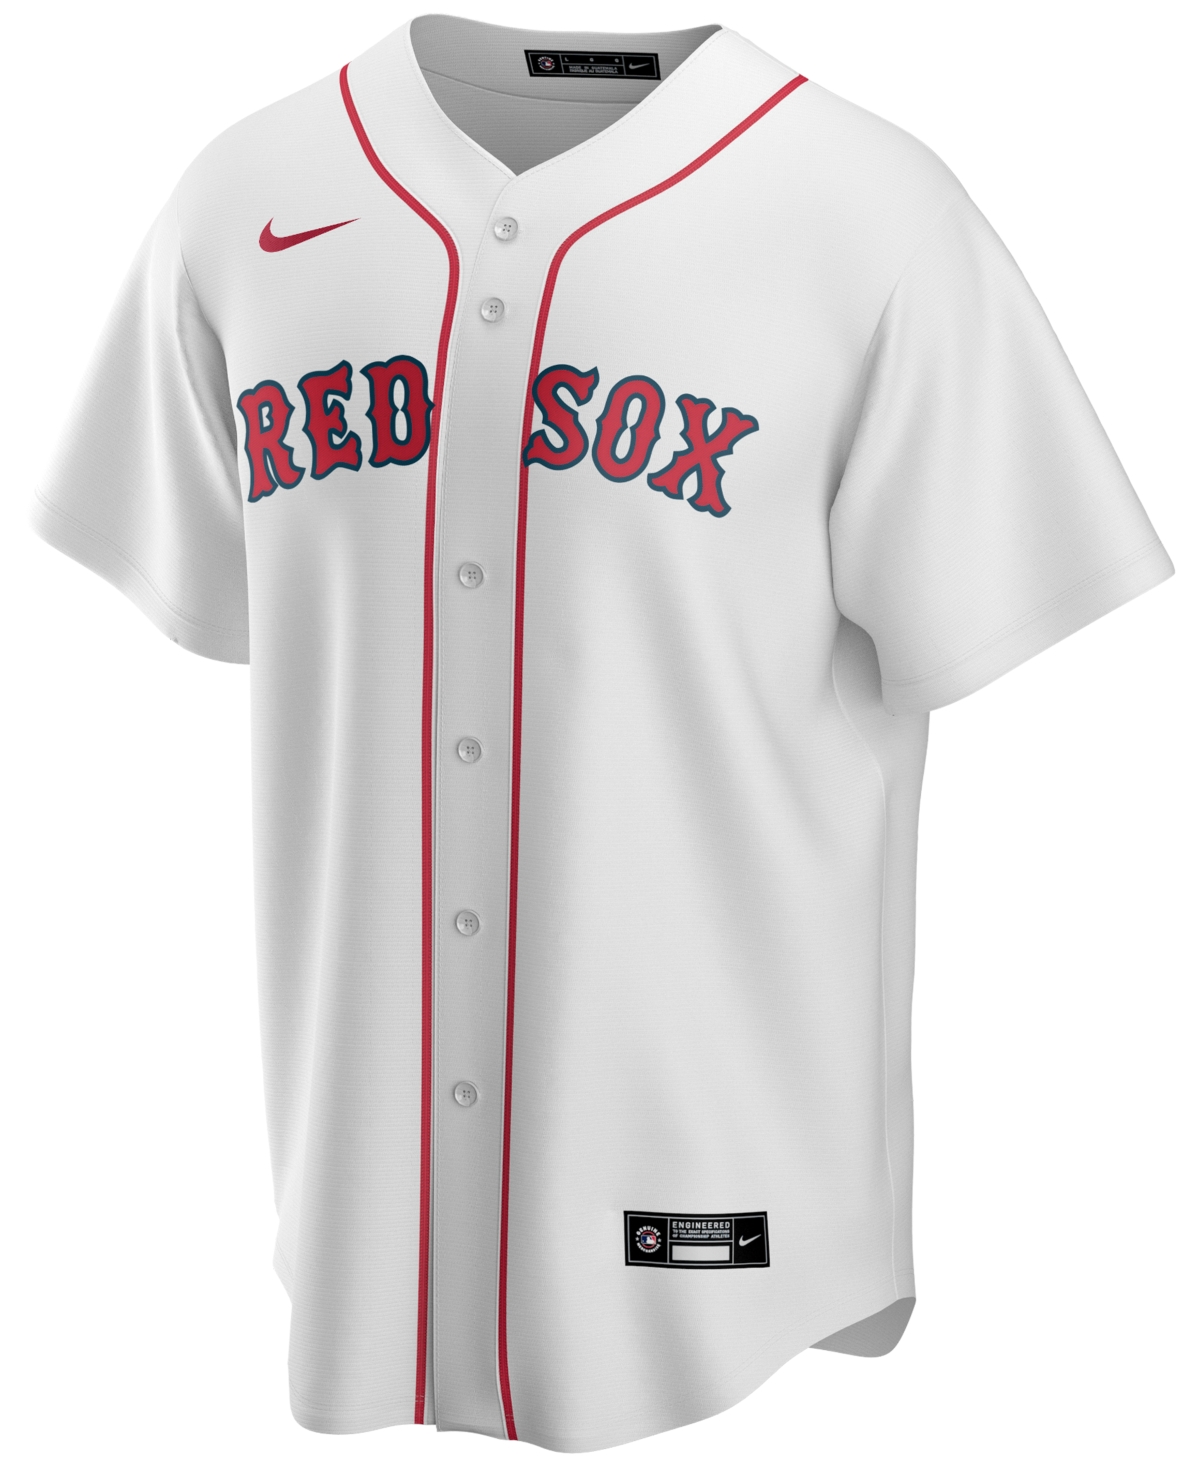 Nike Men's Boston Red Sox Official Blank Replica Jersey